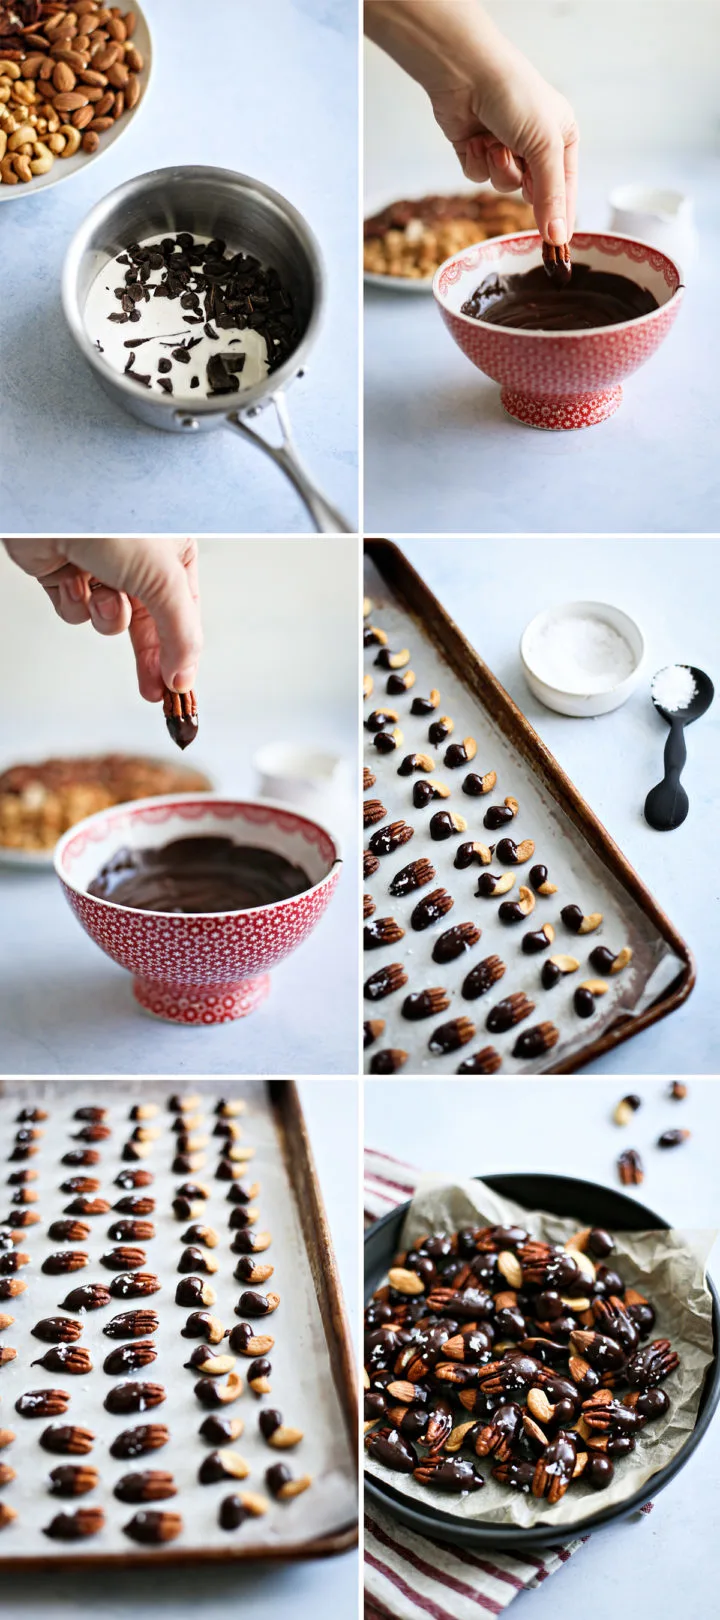 step by step photo instructions to make chocolate covered nuts